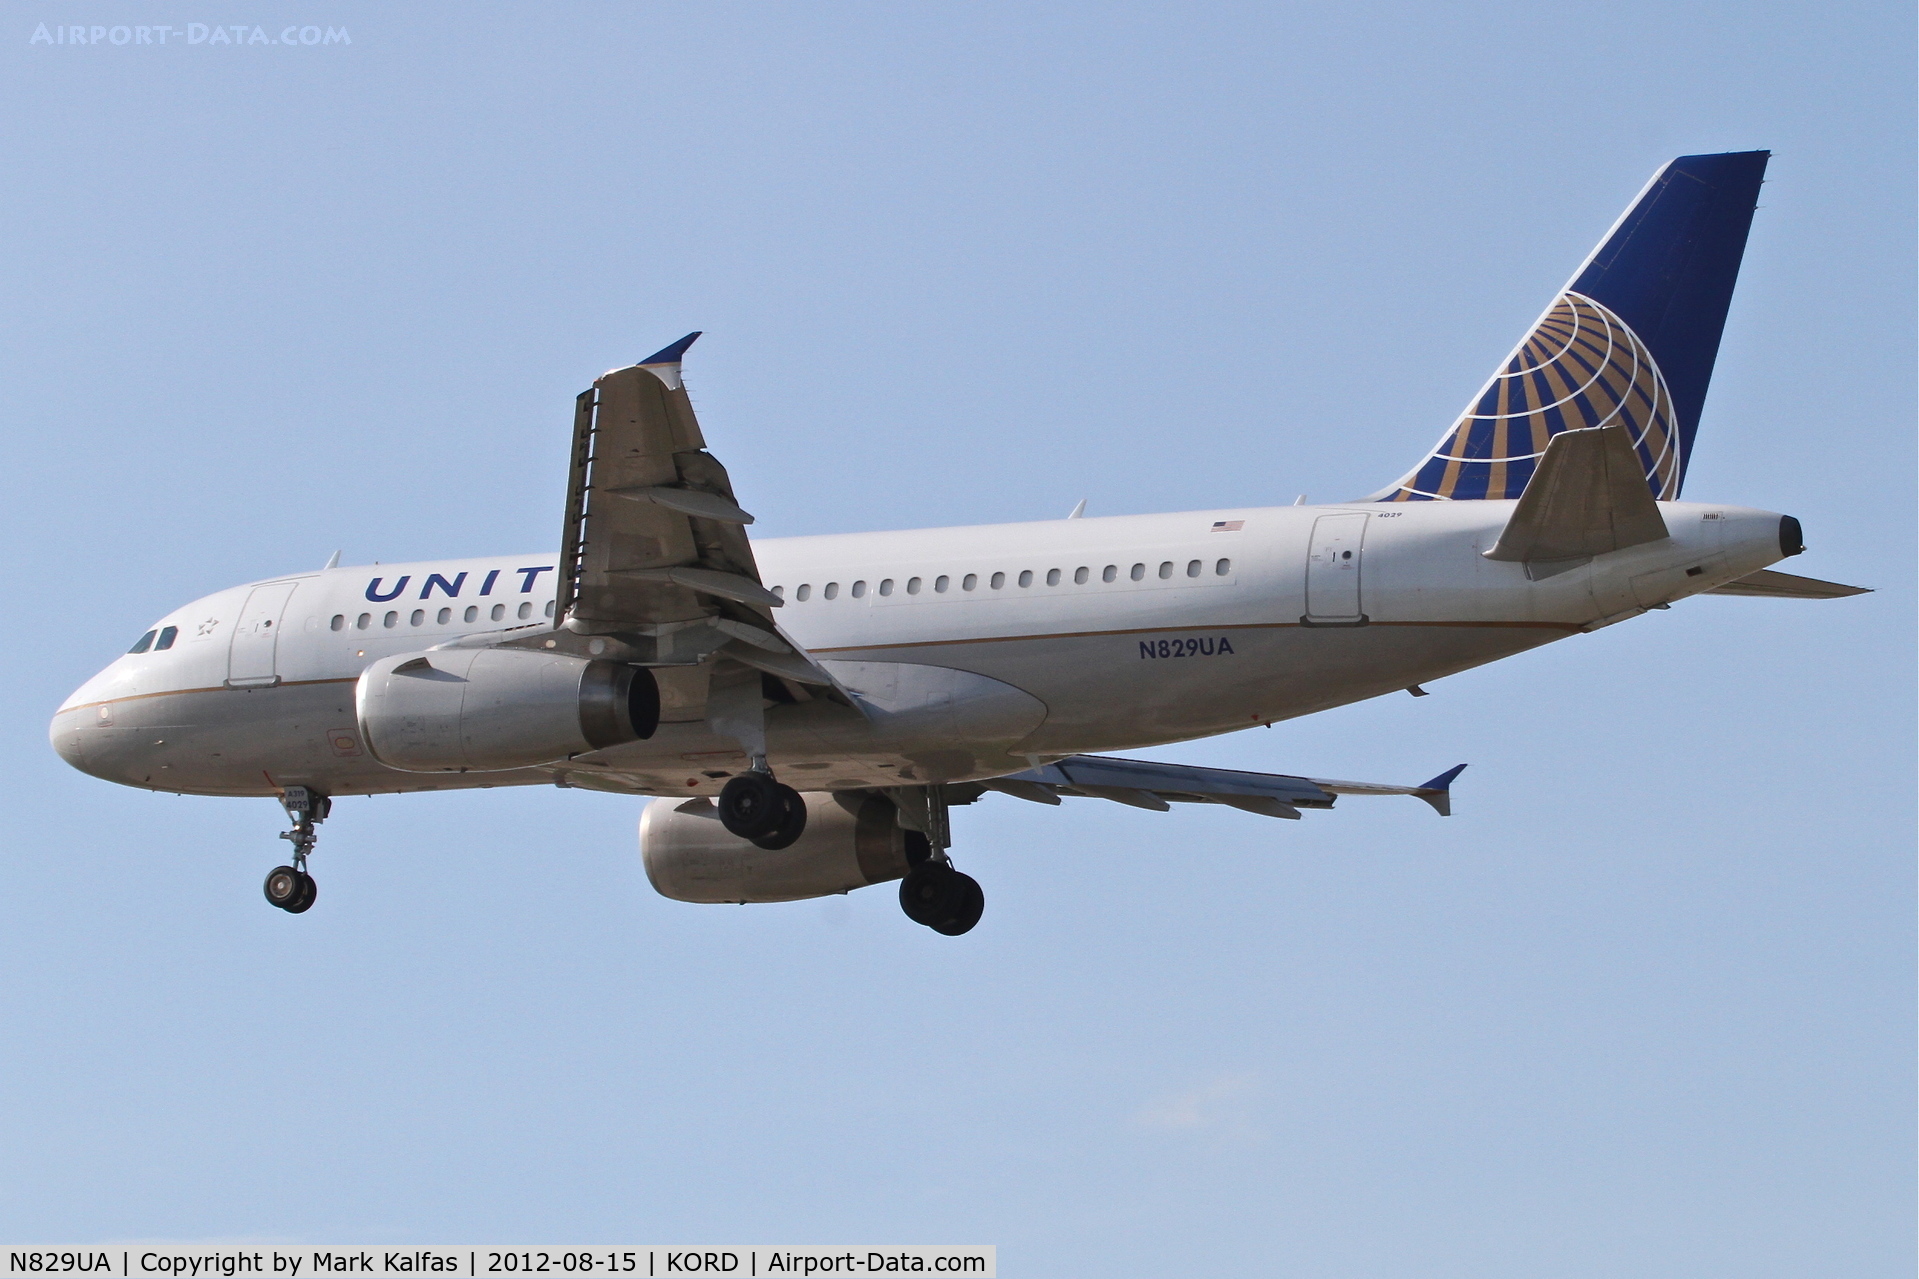 N829UA, 2000 Airbus A319-131 C/N 1211, United Airbus A319-131, UAL6868 arriving from Tampa/KTPA, RWY 28 approach KORD.